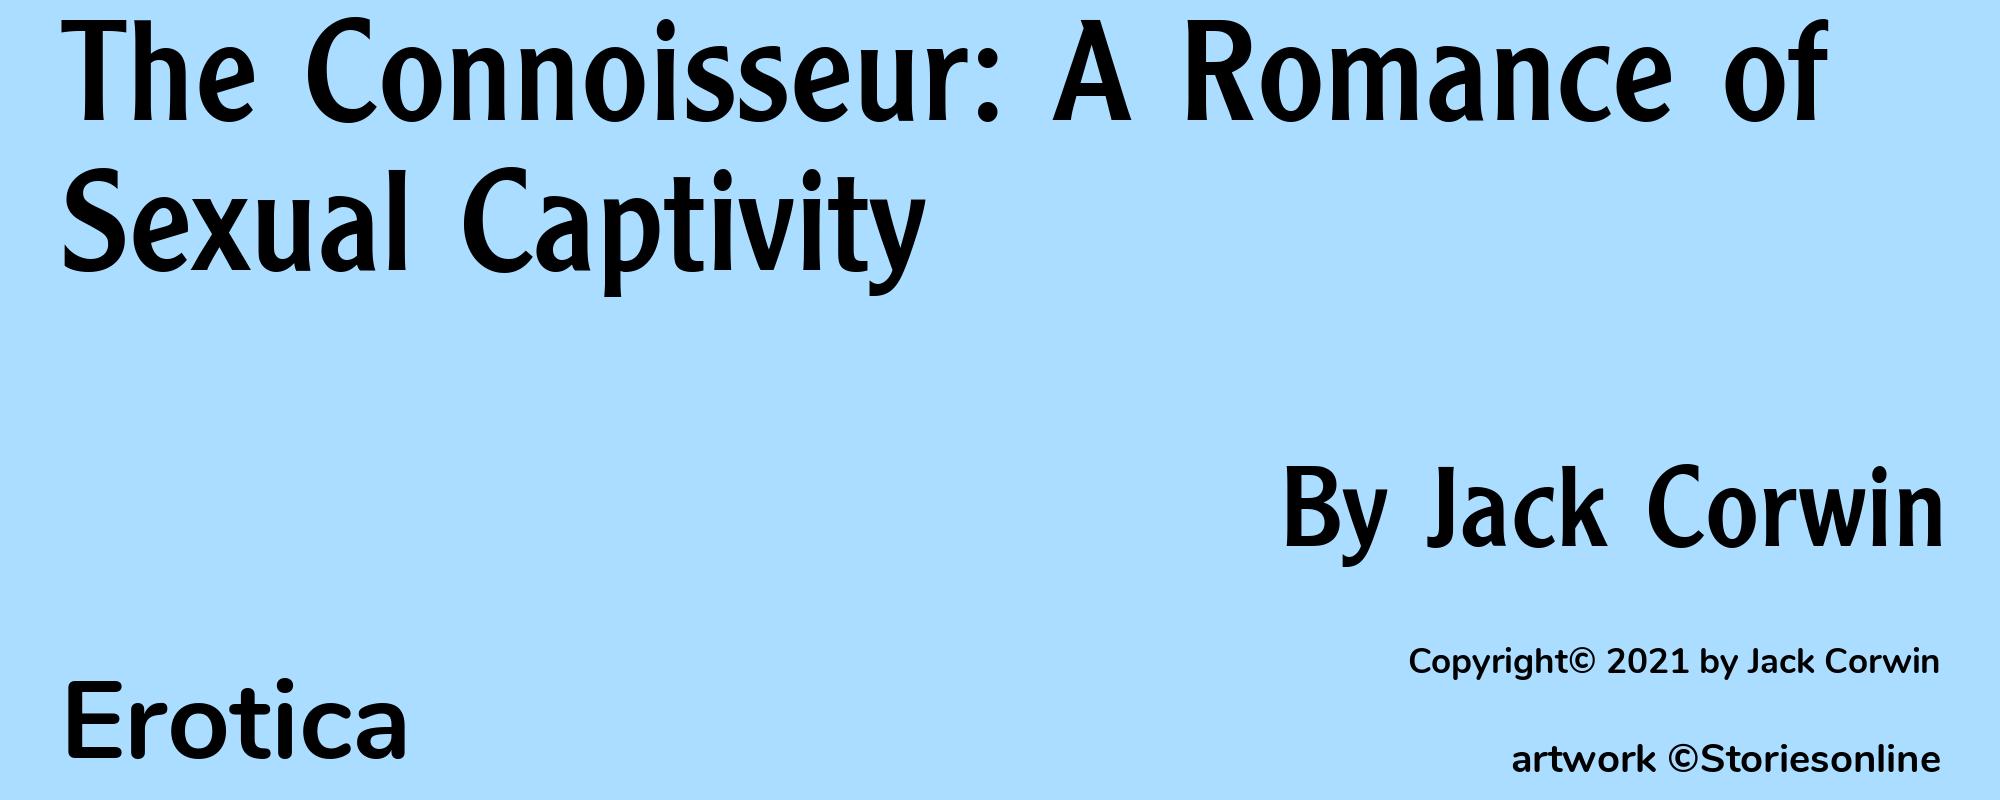 The Connoisseur: A Romance of Sexual Captivity - Cover